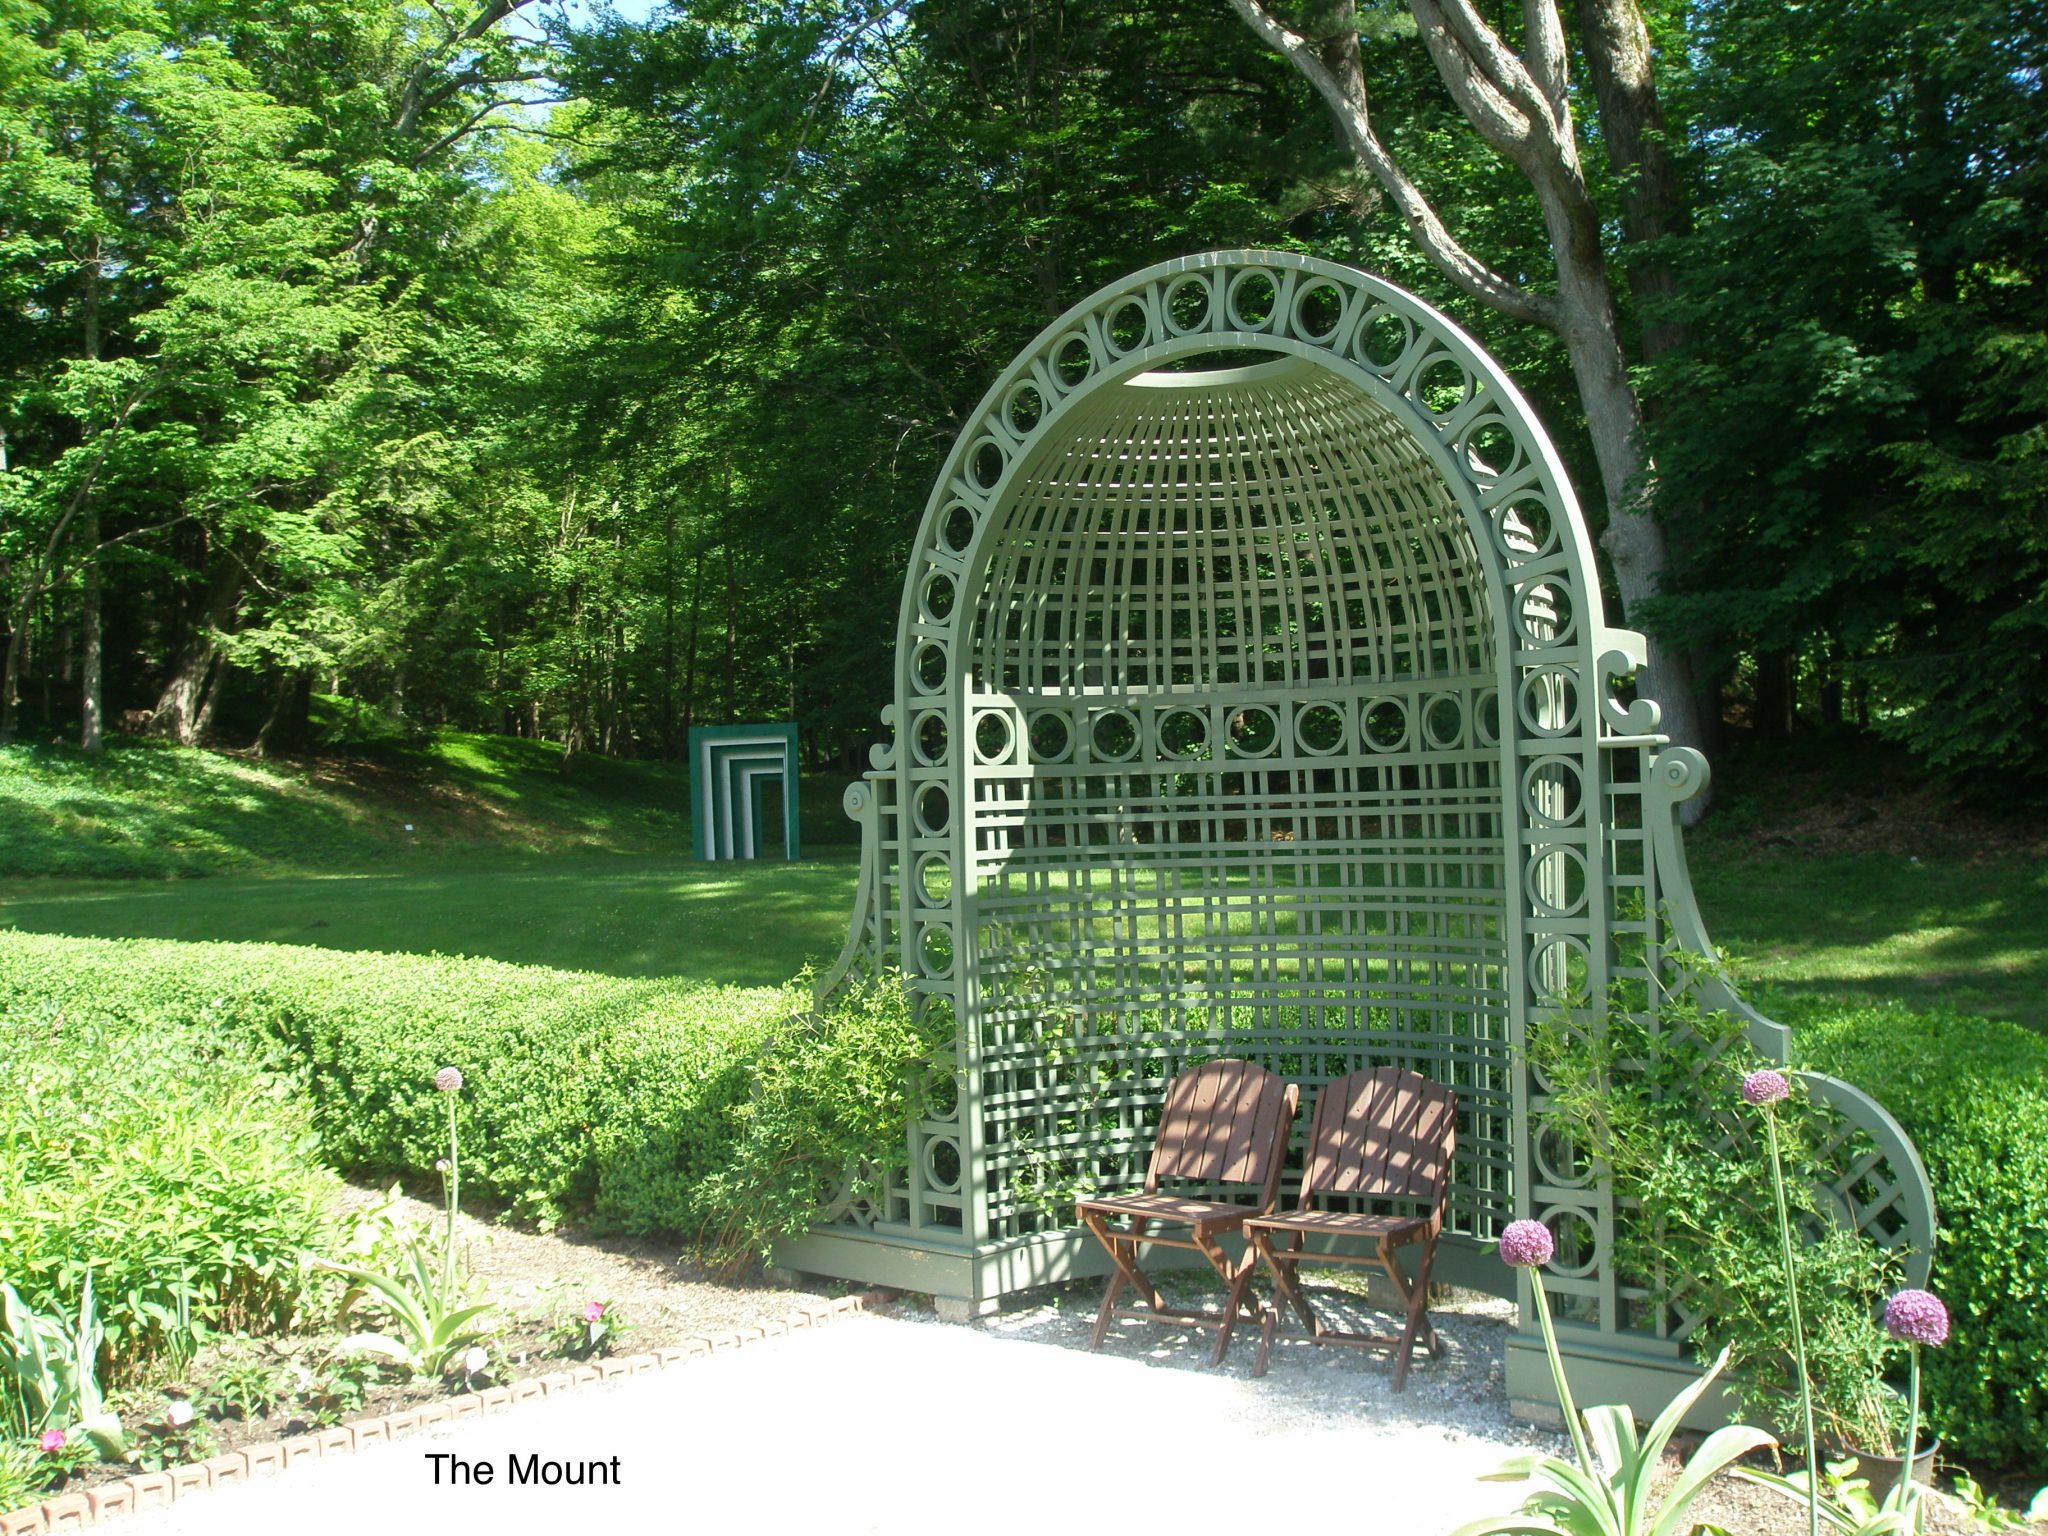 Here's a nice transition, from new to old. In the background: a contemporary, green and white archway. In the foreground: the Flower Garden's original Trellis Niche (designed by Ogden Codman Jr., when the house was built). 